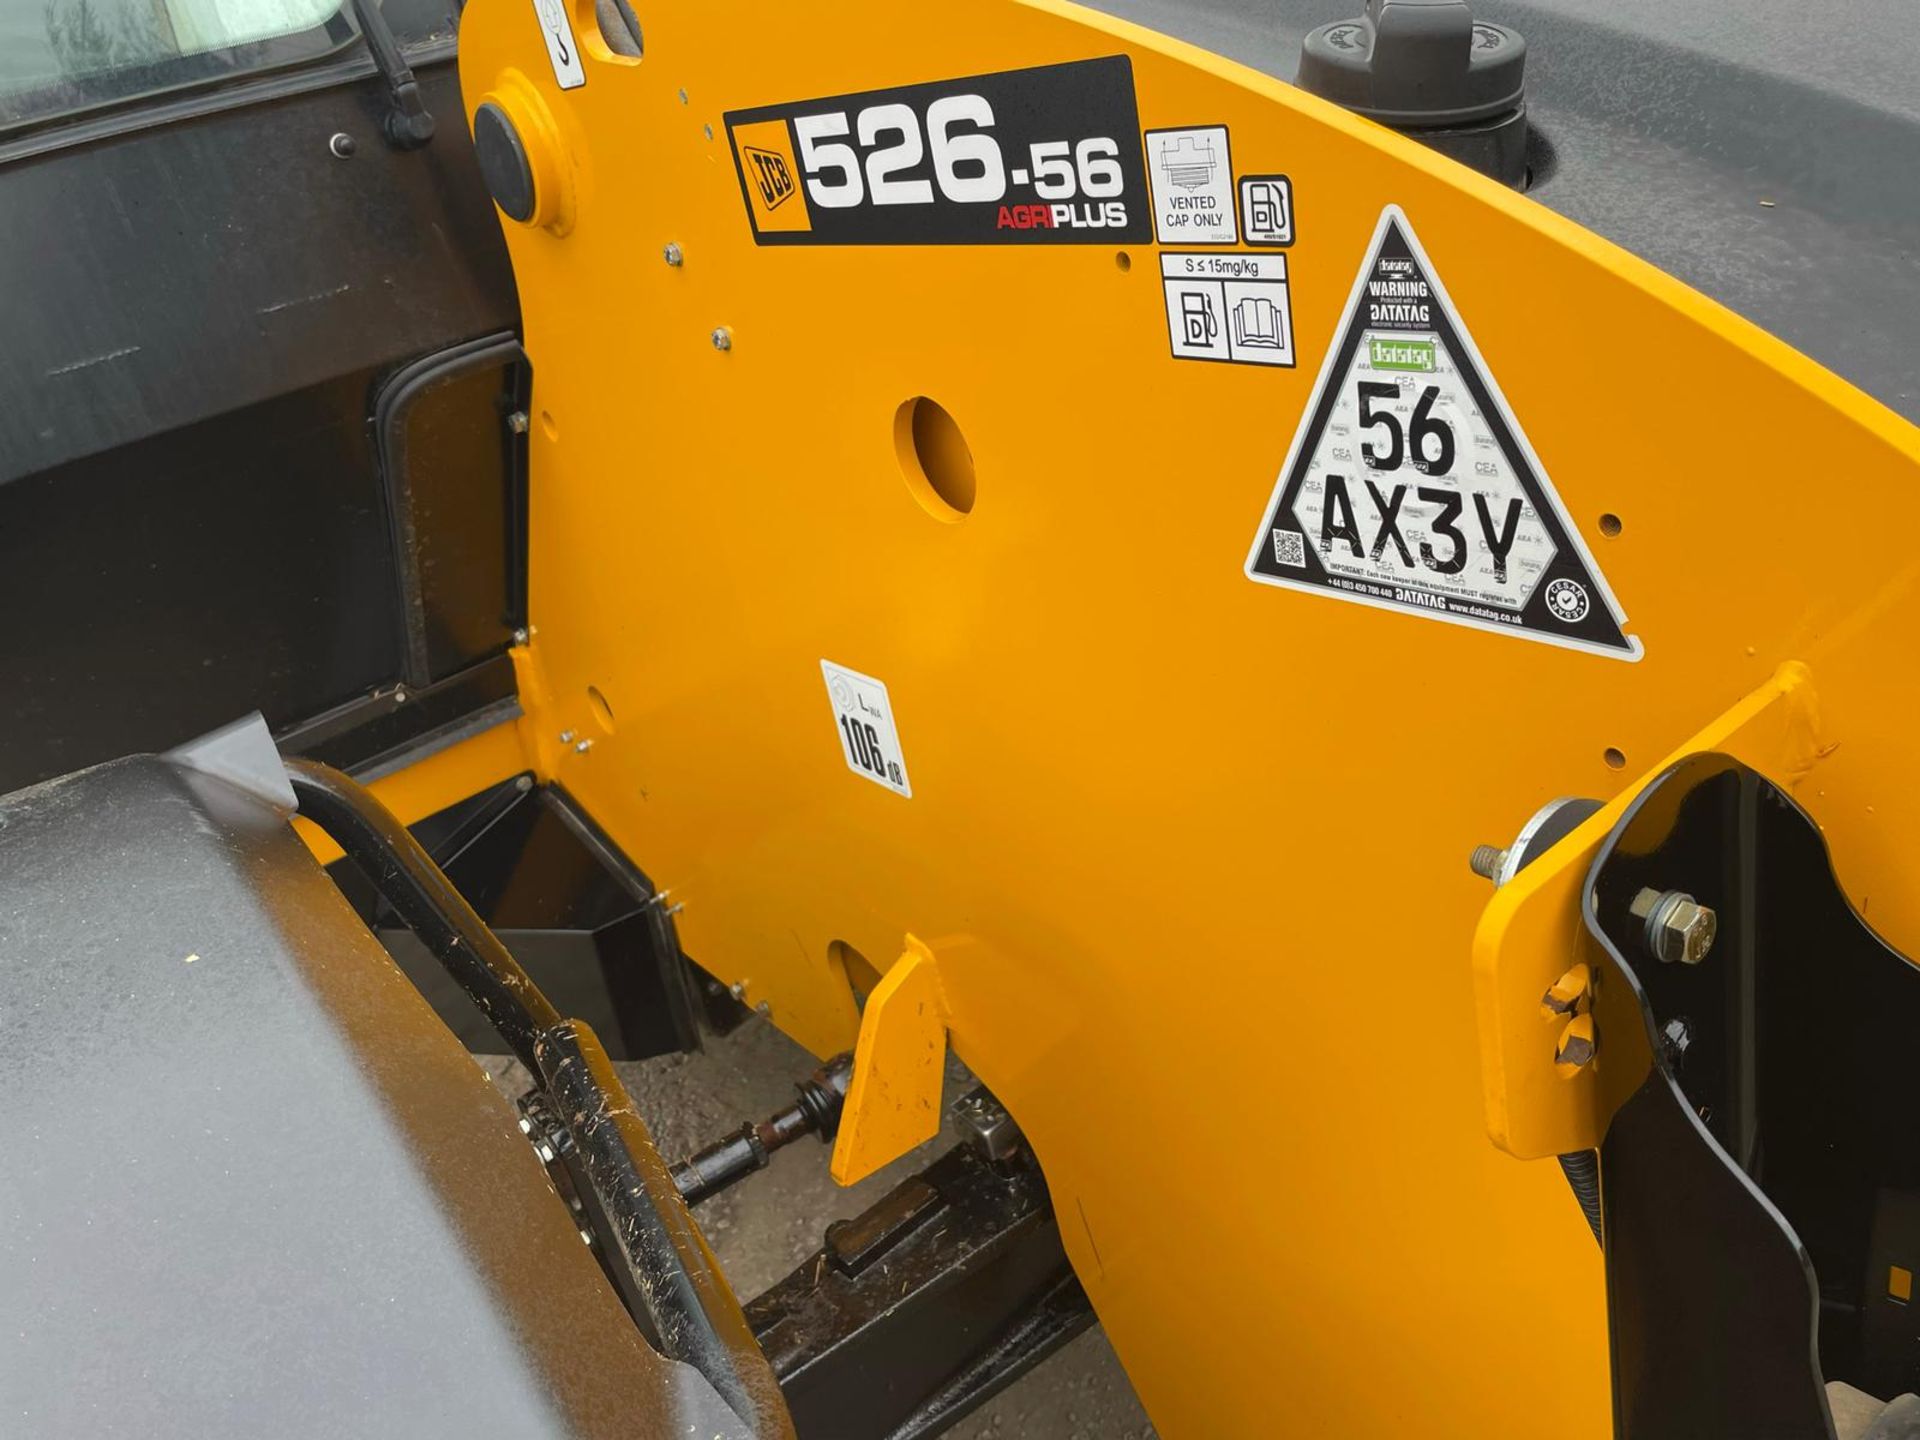 2019/69 JCB 526-56 AGRI PLUS TELEHANDLER, SHOWING A LOW AND GENUINE 750 HOURS *PLUS VAT* - Image 26 of 29